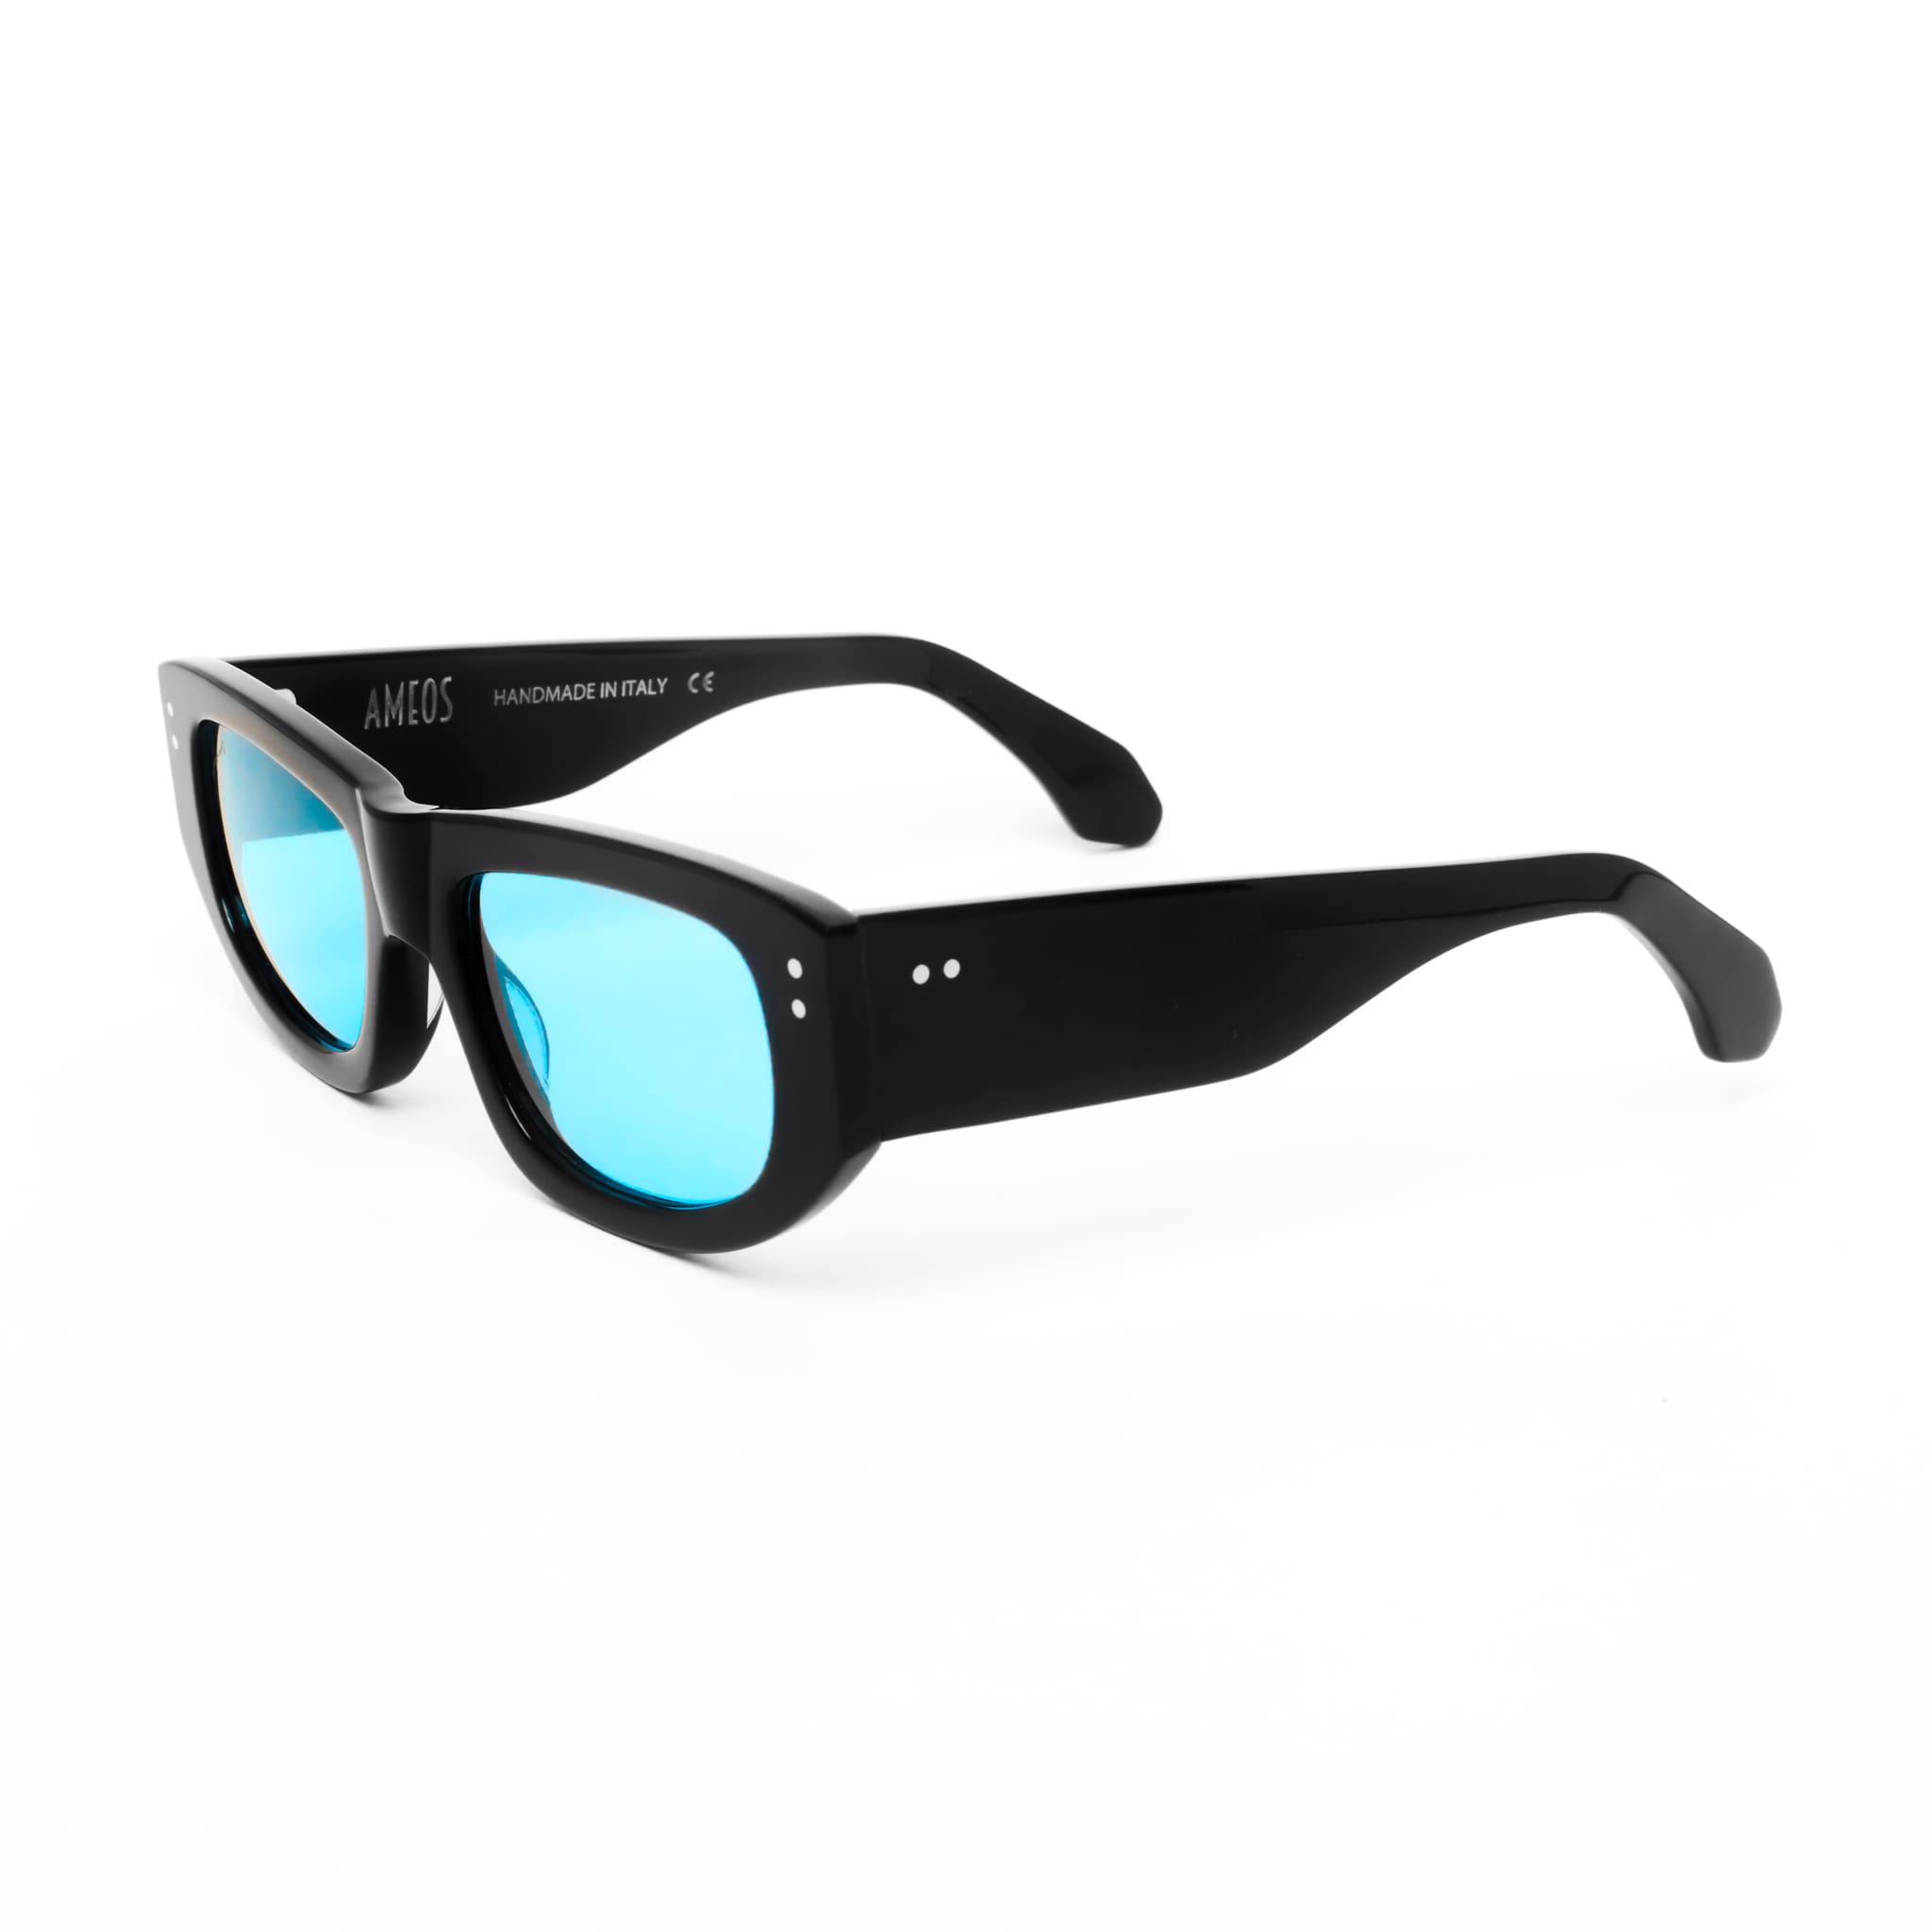 Ameos Forever collection Lex model. Black frames with turquoise lenses. Side view. Genderless, gender neutral eyewear